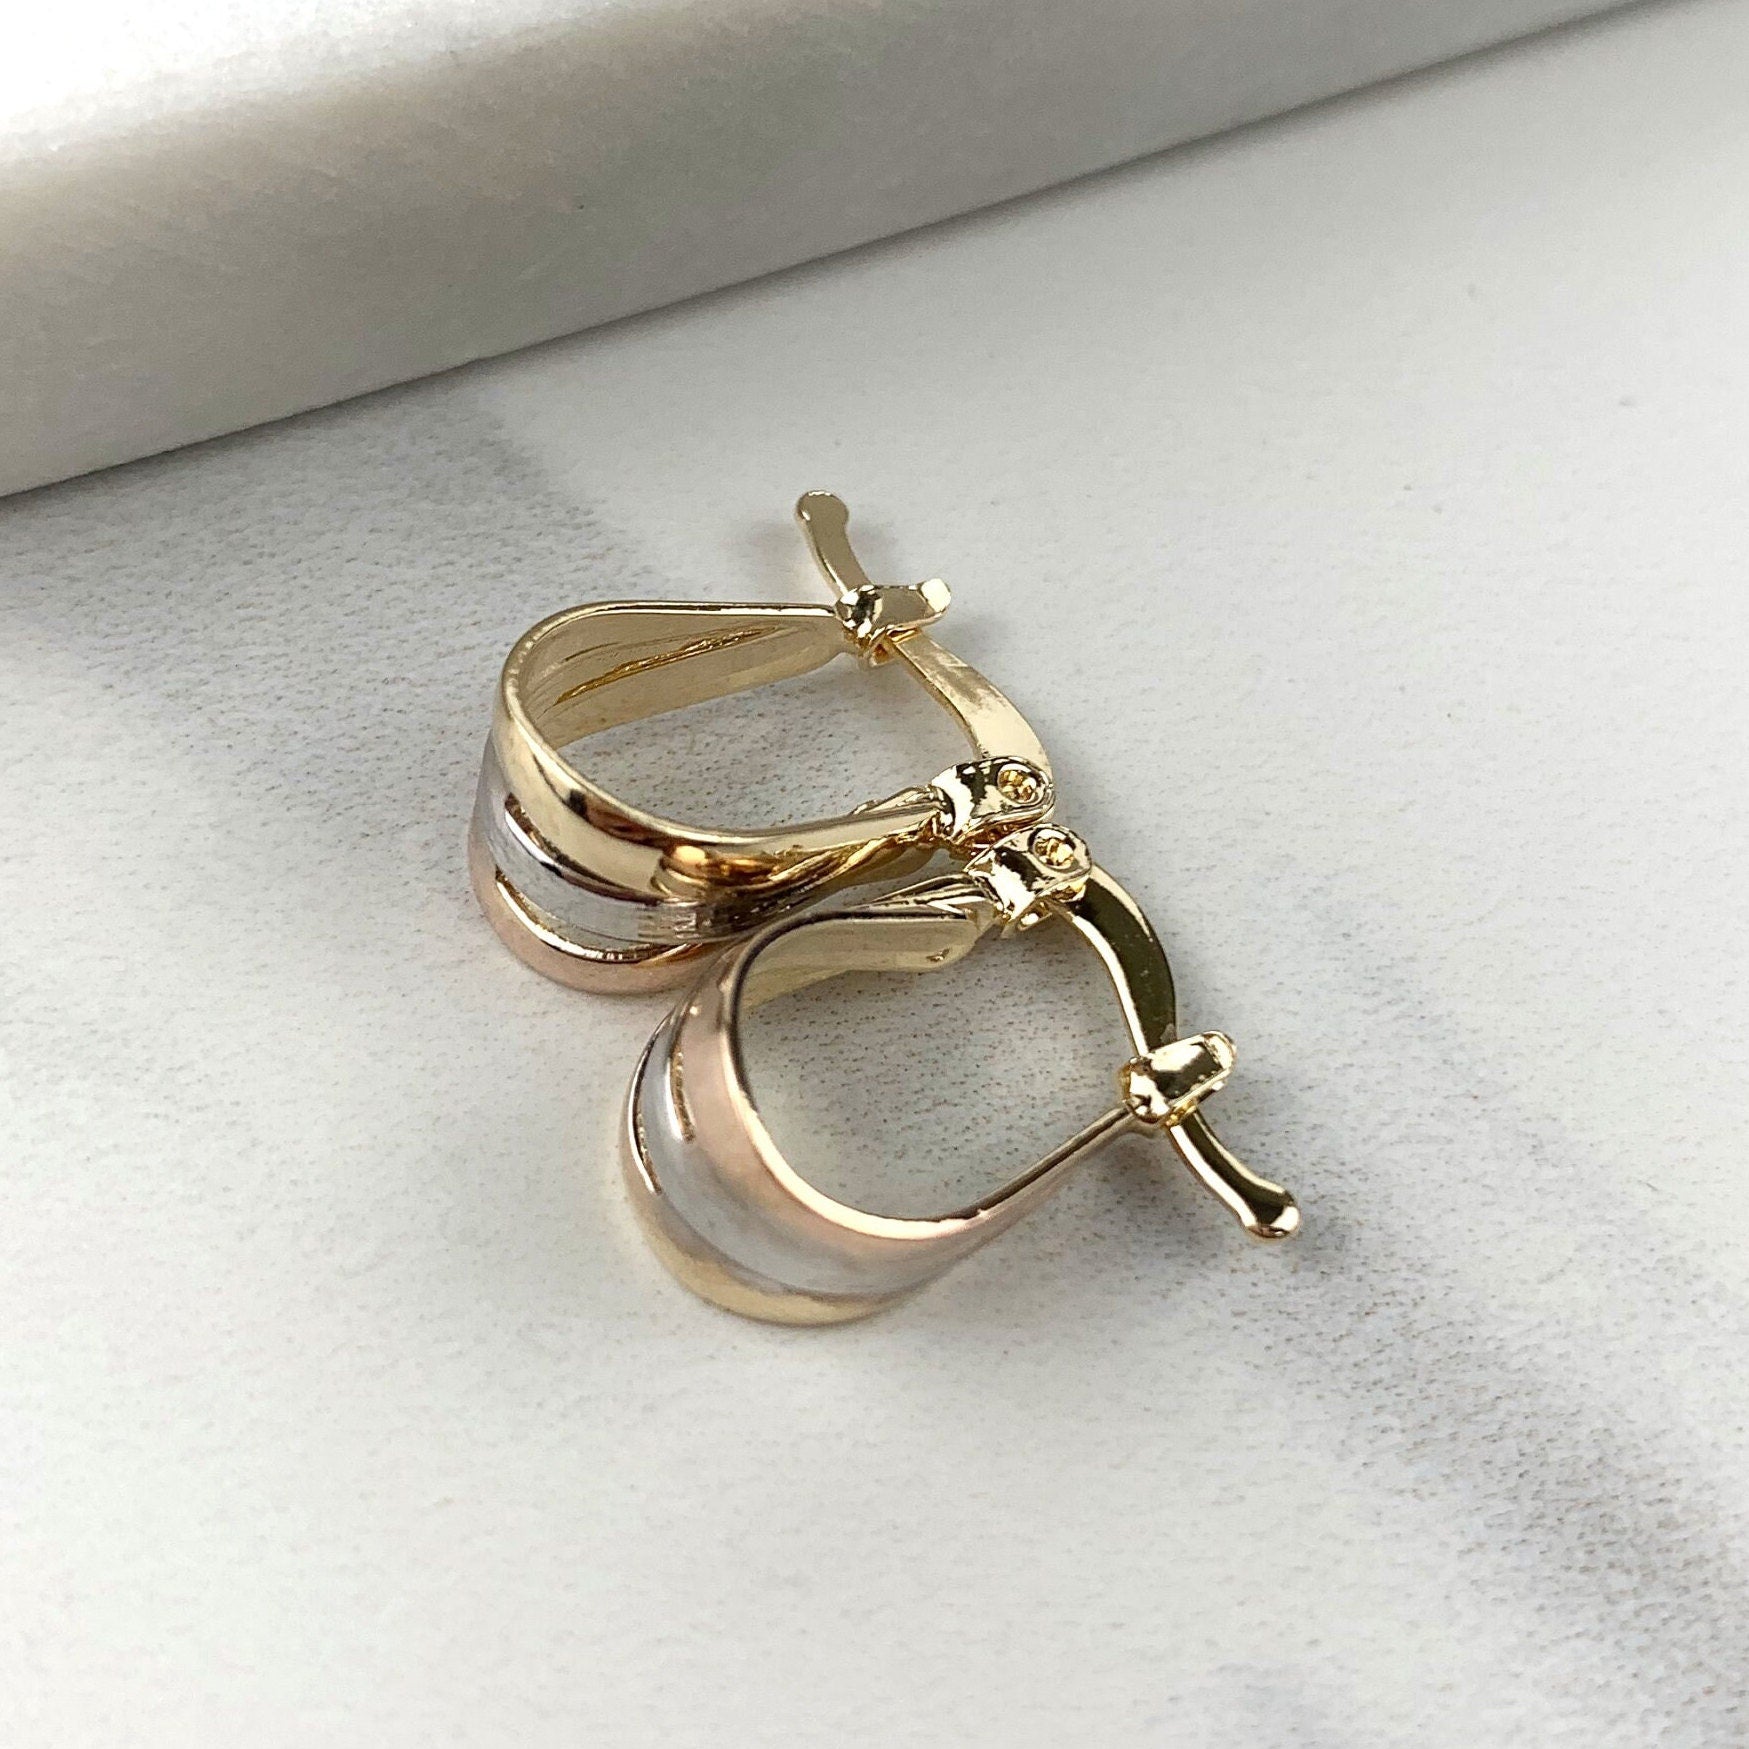 18k Gold Filled Oval Hoop Earrings, Three Tone, Wholesale Jewelry Making Supplies